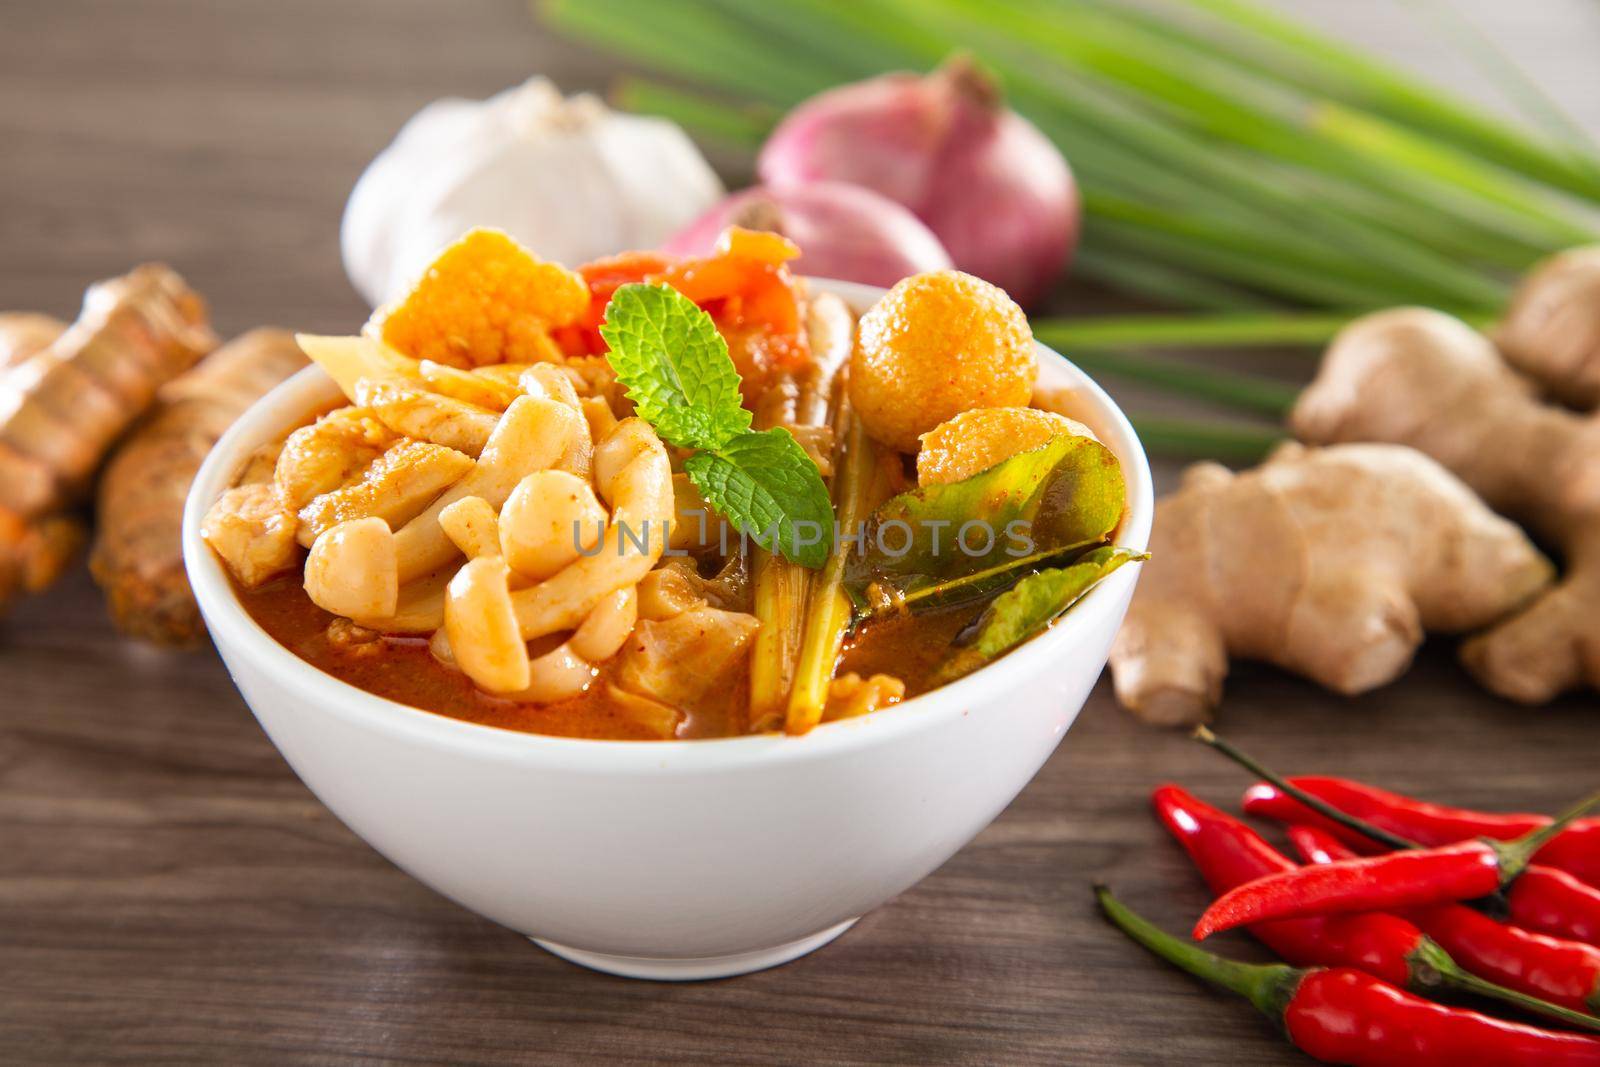 Tom yam kong or Tom yum, Tom yam is a spicy clear soup typical in Thailand and No.1 Thai Dish Cuisine. Thai food.